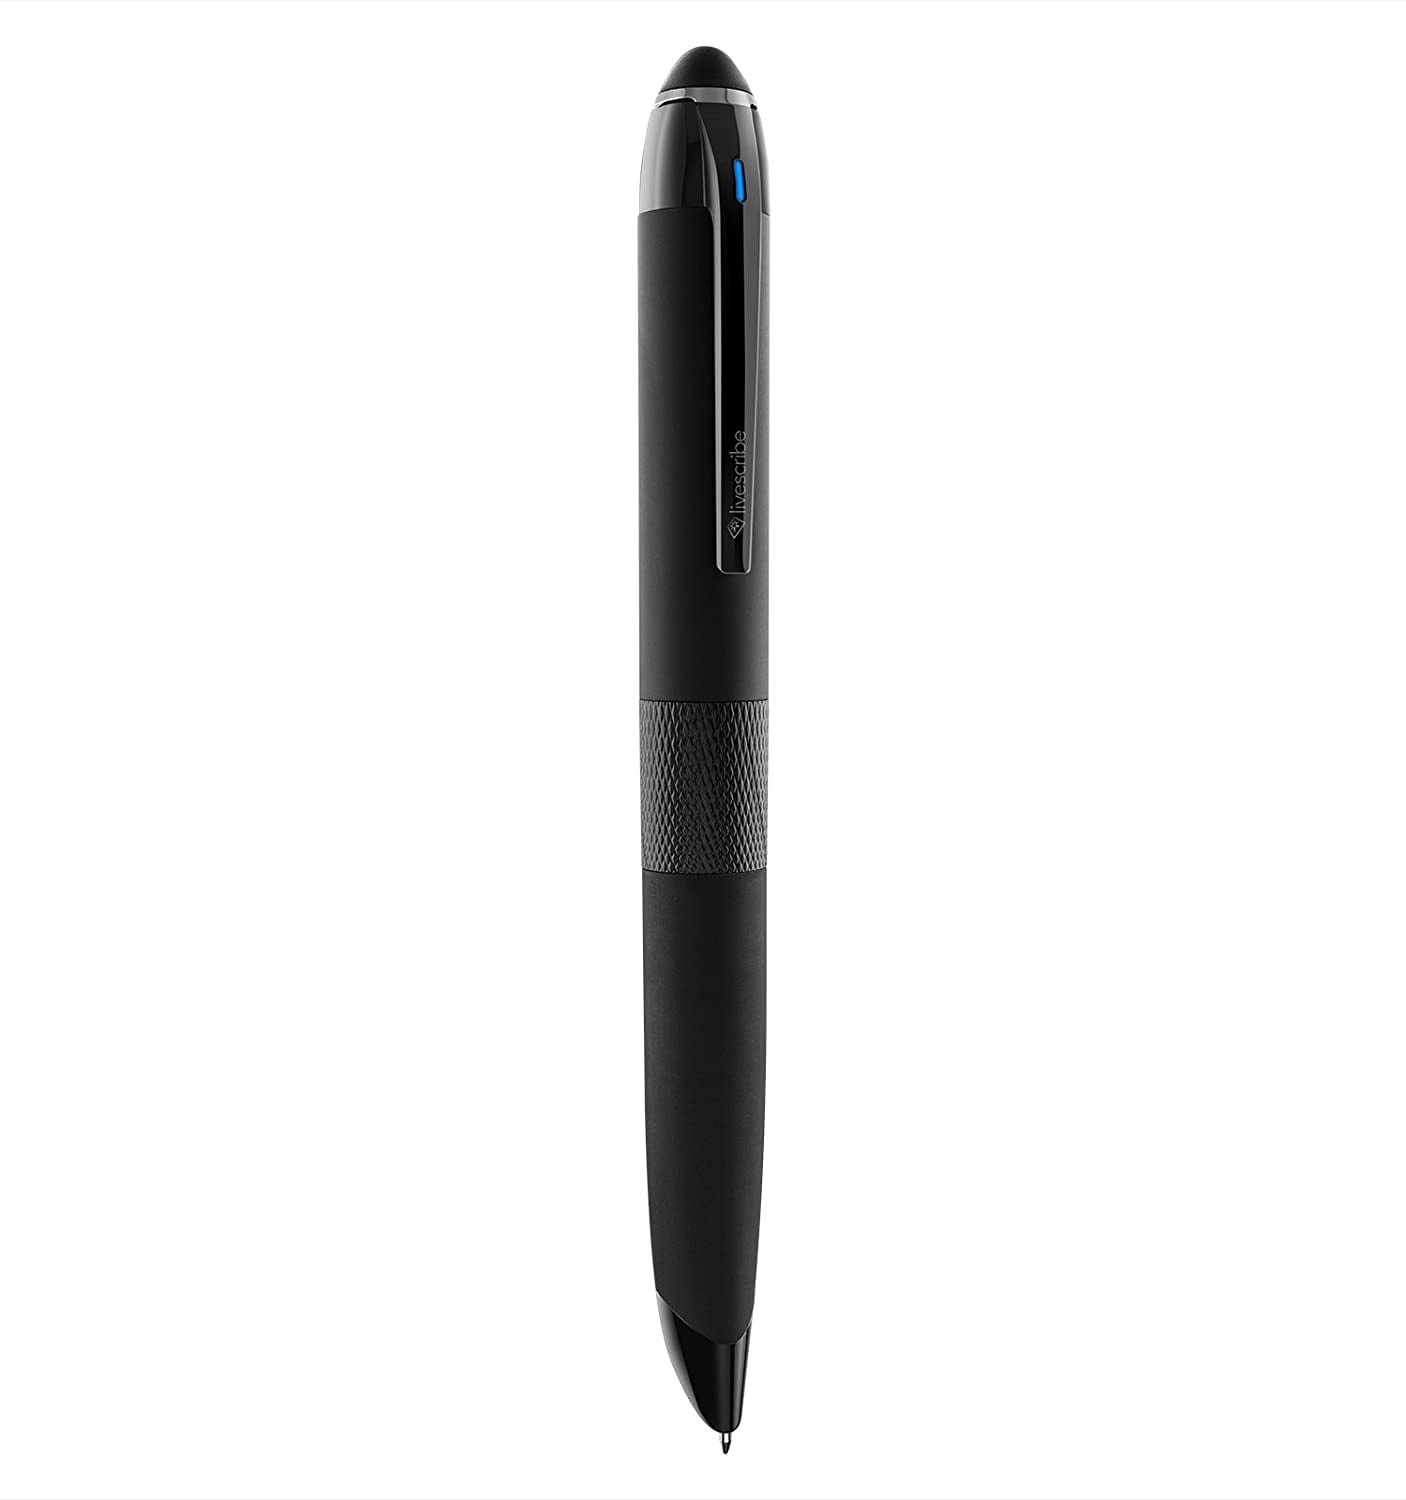 Livescribe 3 Smartpen APX-00020 for iOS and Android 